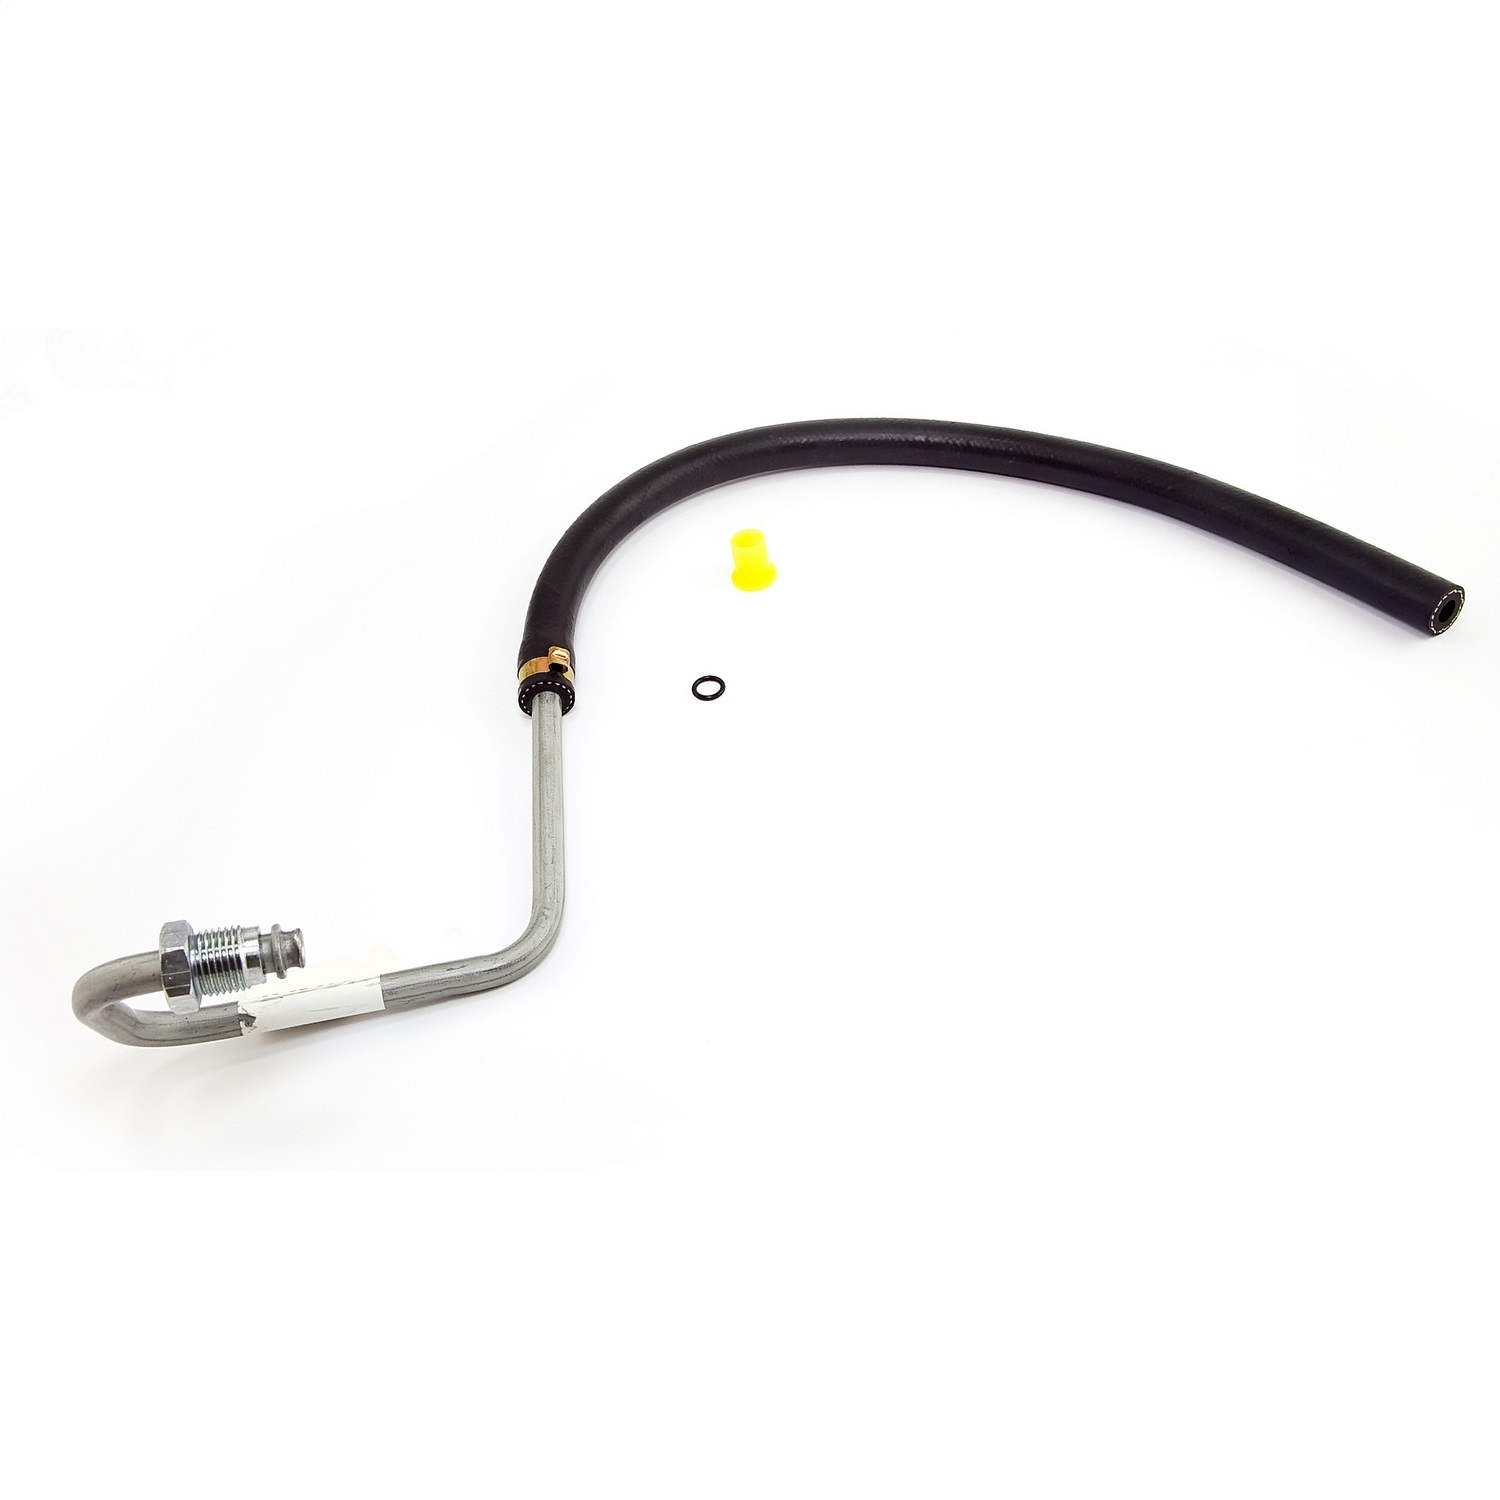 Omix This Power Steering Return Hose From Omix Fits 97-02 Jeep Wrangler Tj With A 4.0L Engine.,